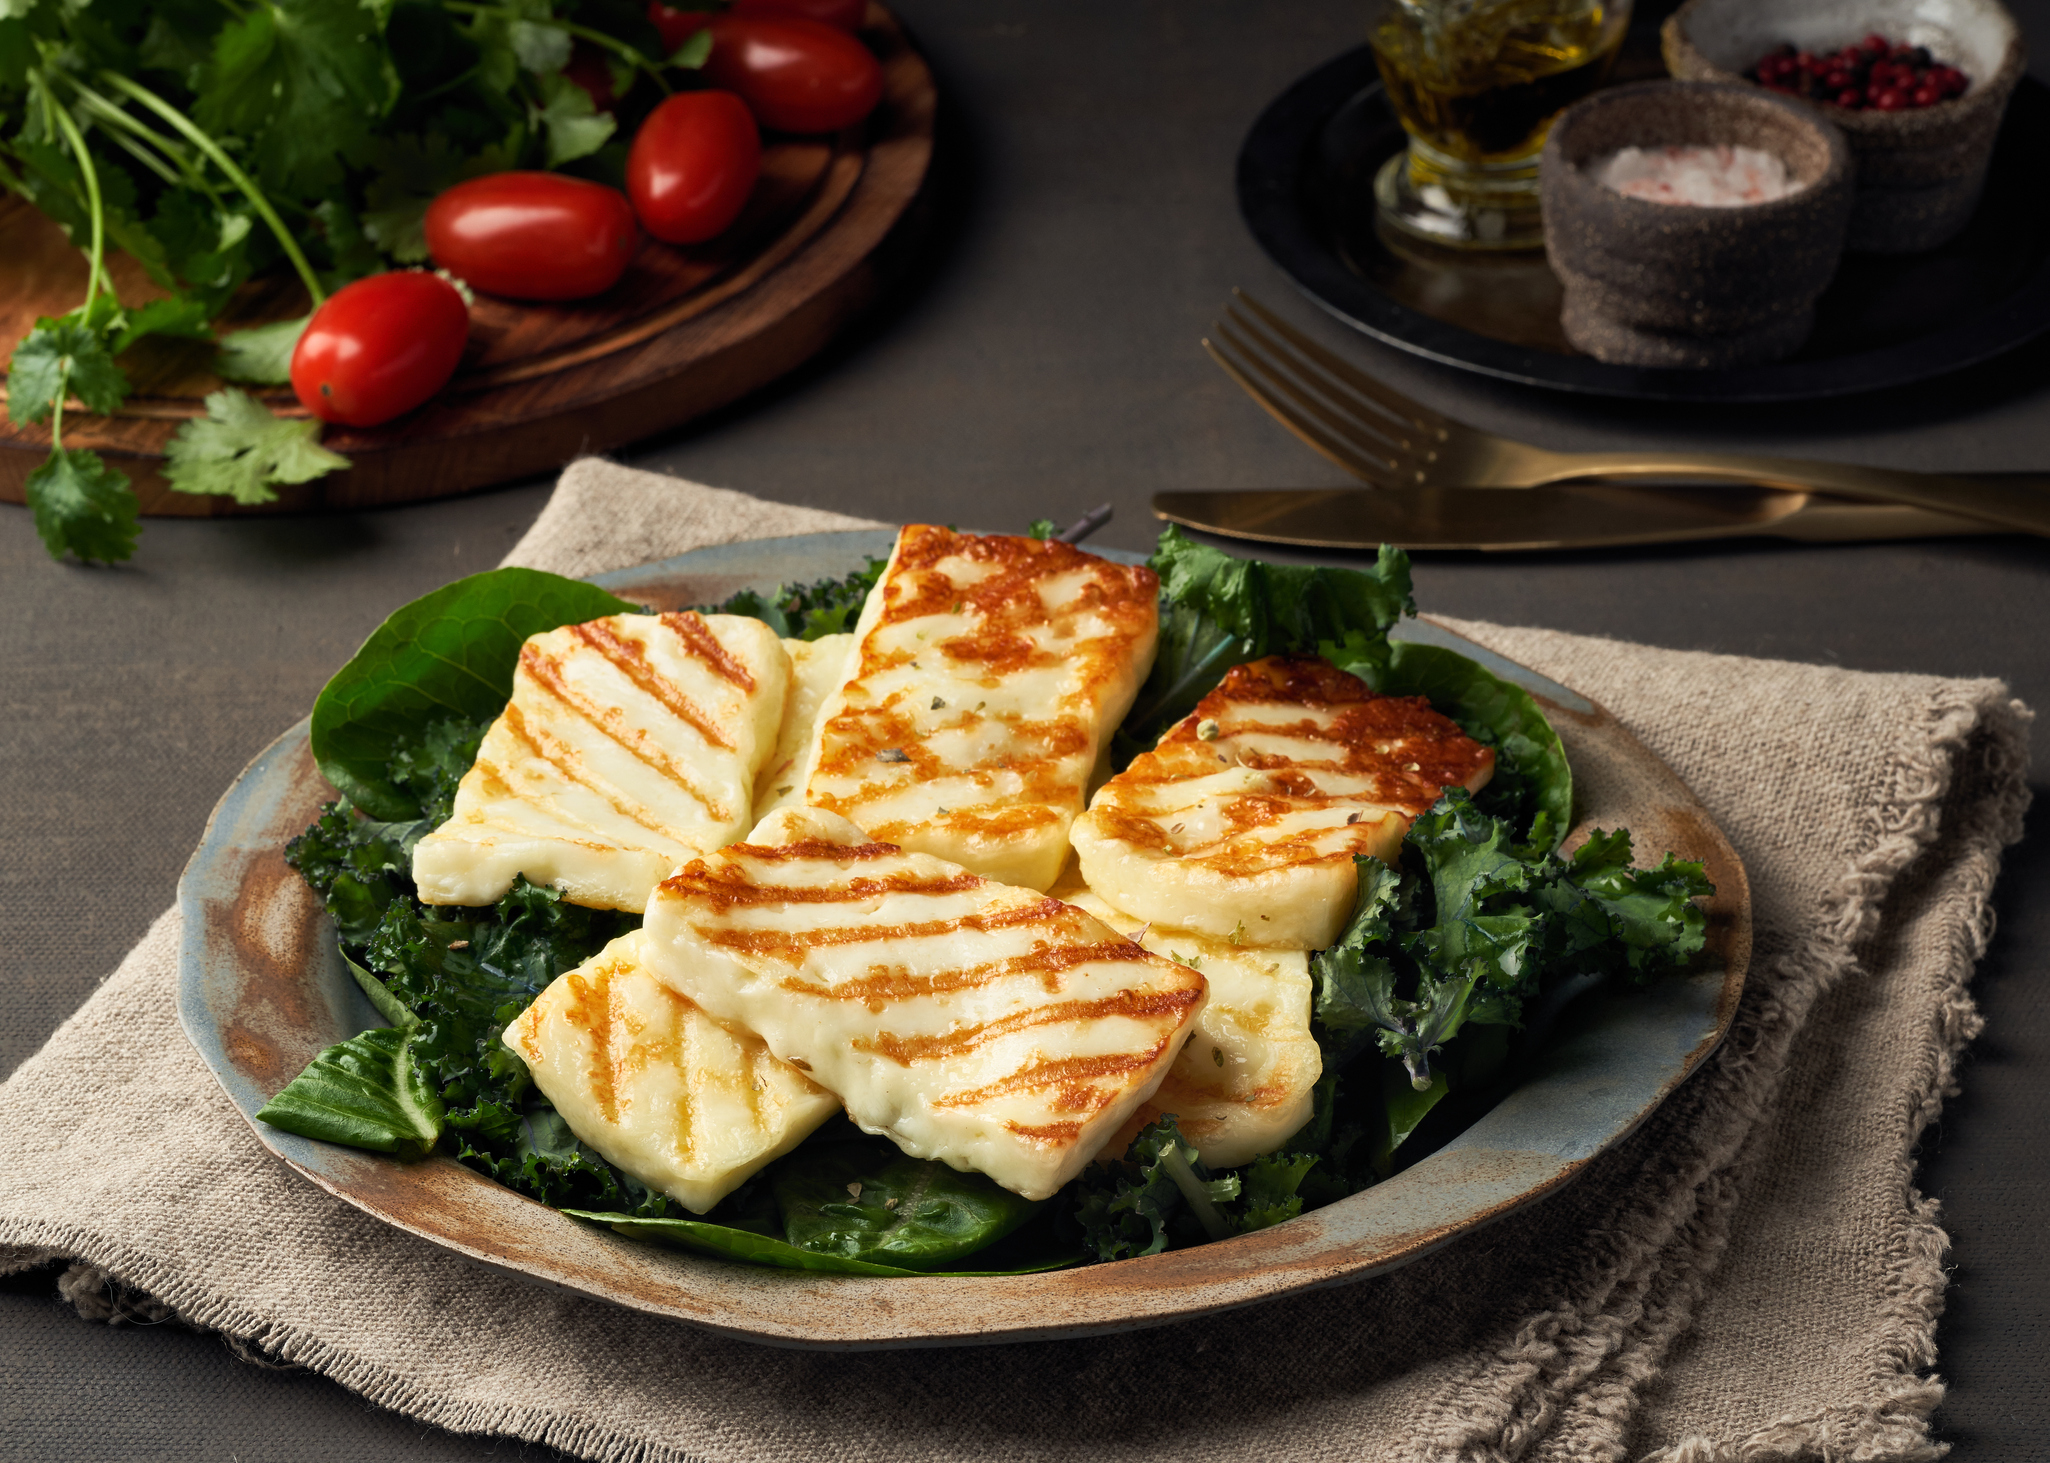 Cyprus fried halloumi cheese with healthy green salad. Lchf, pegan, fodmap, paleo, scd, keto, ketogenic diet. Balanced food, a greek clean eating recipe.